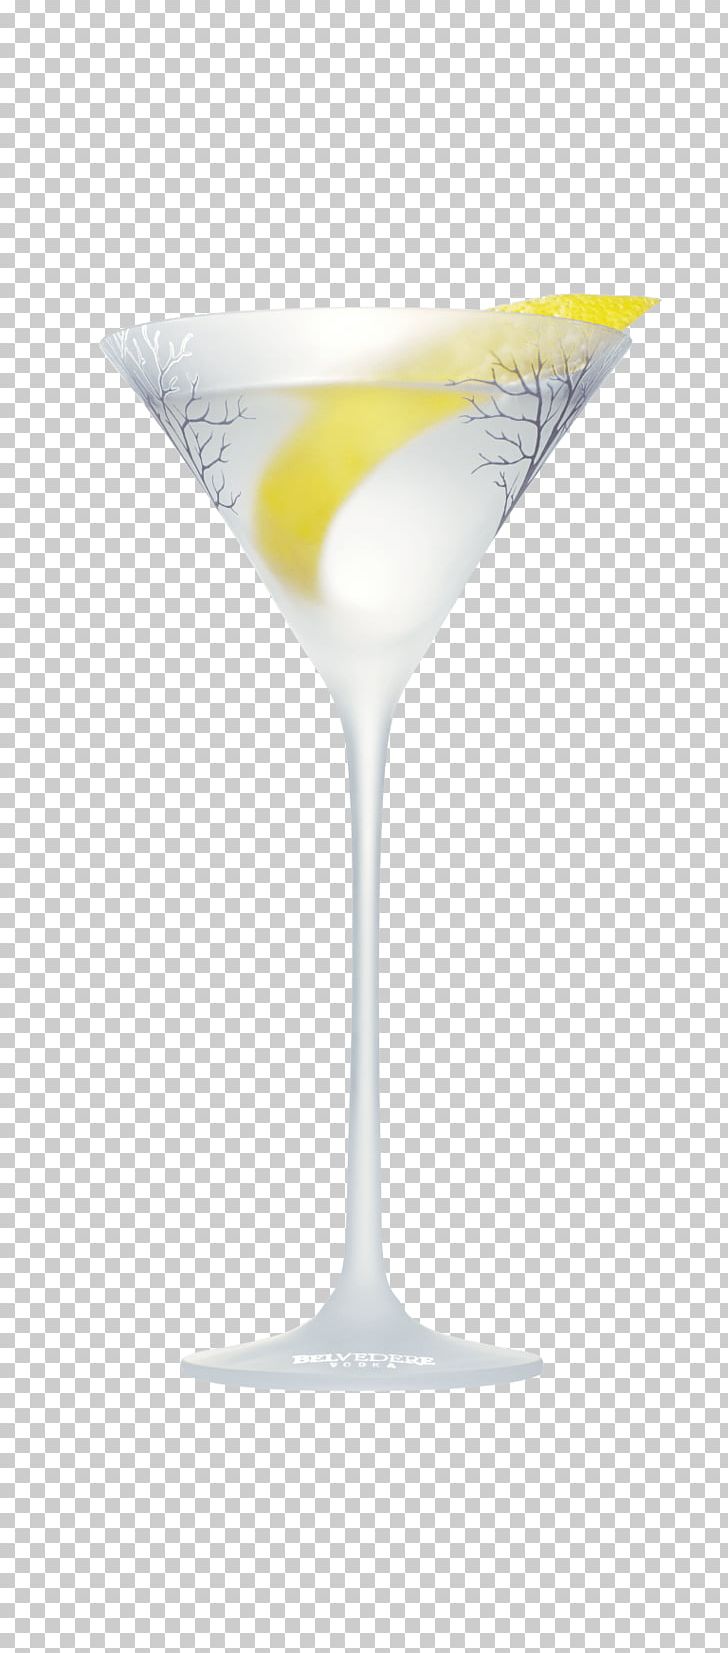 Cocktail Garnish Martini Cocktail Glass PNG, Clipart, Belvedere, Belvedere Vodka, Champagne Stemware, Classic Cocktail, Cocktail Free PNG Download